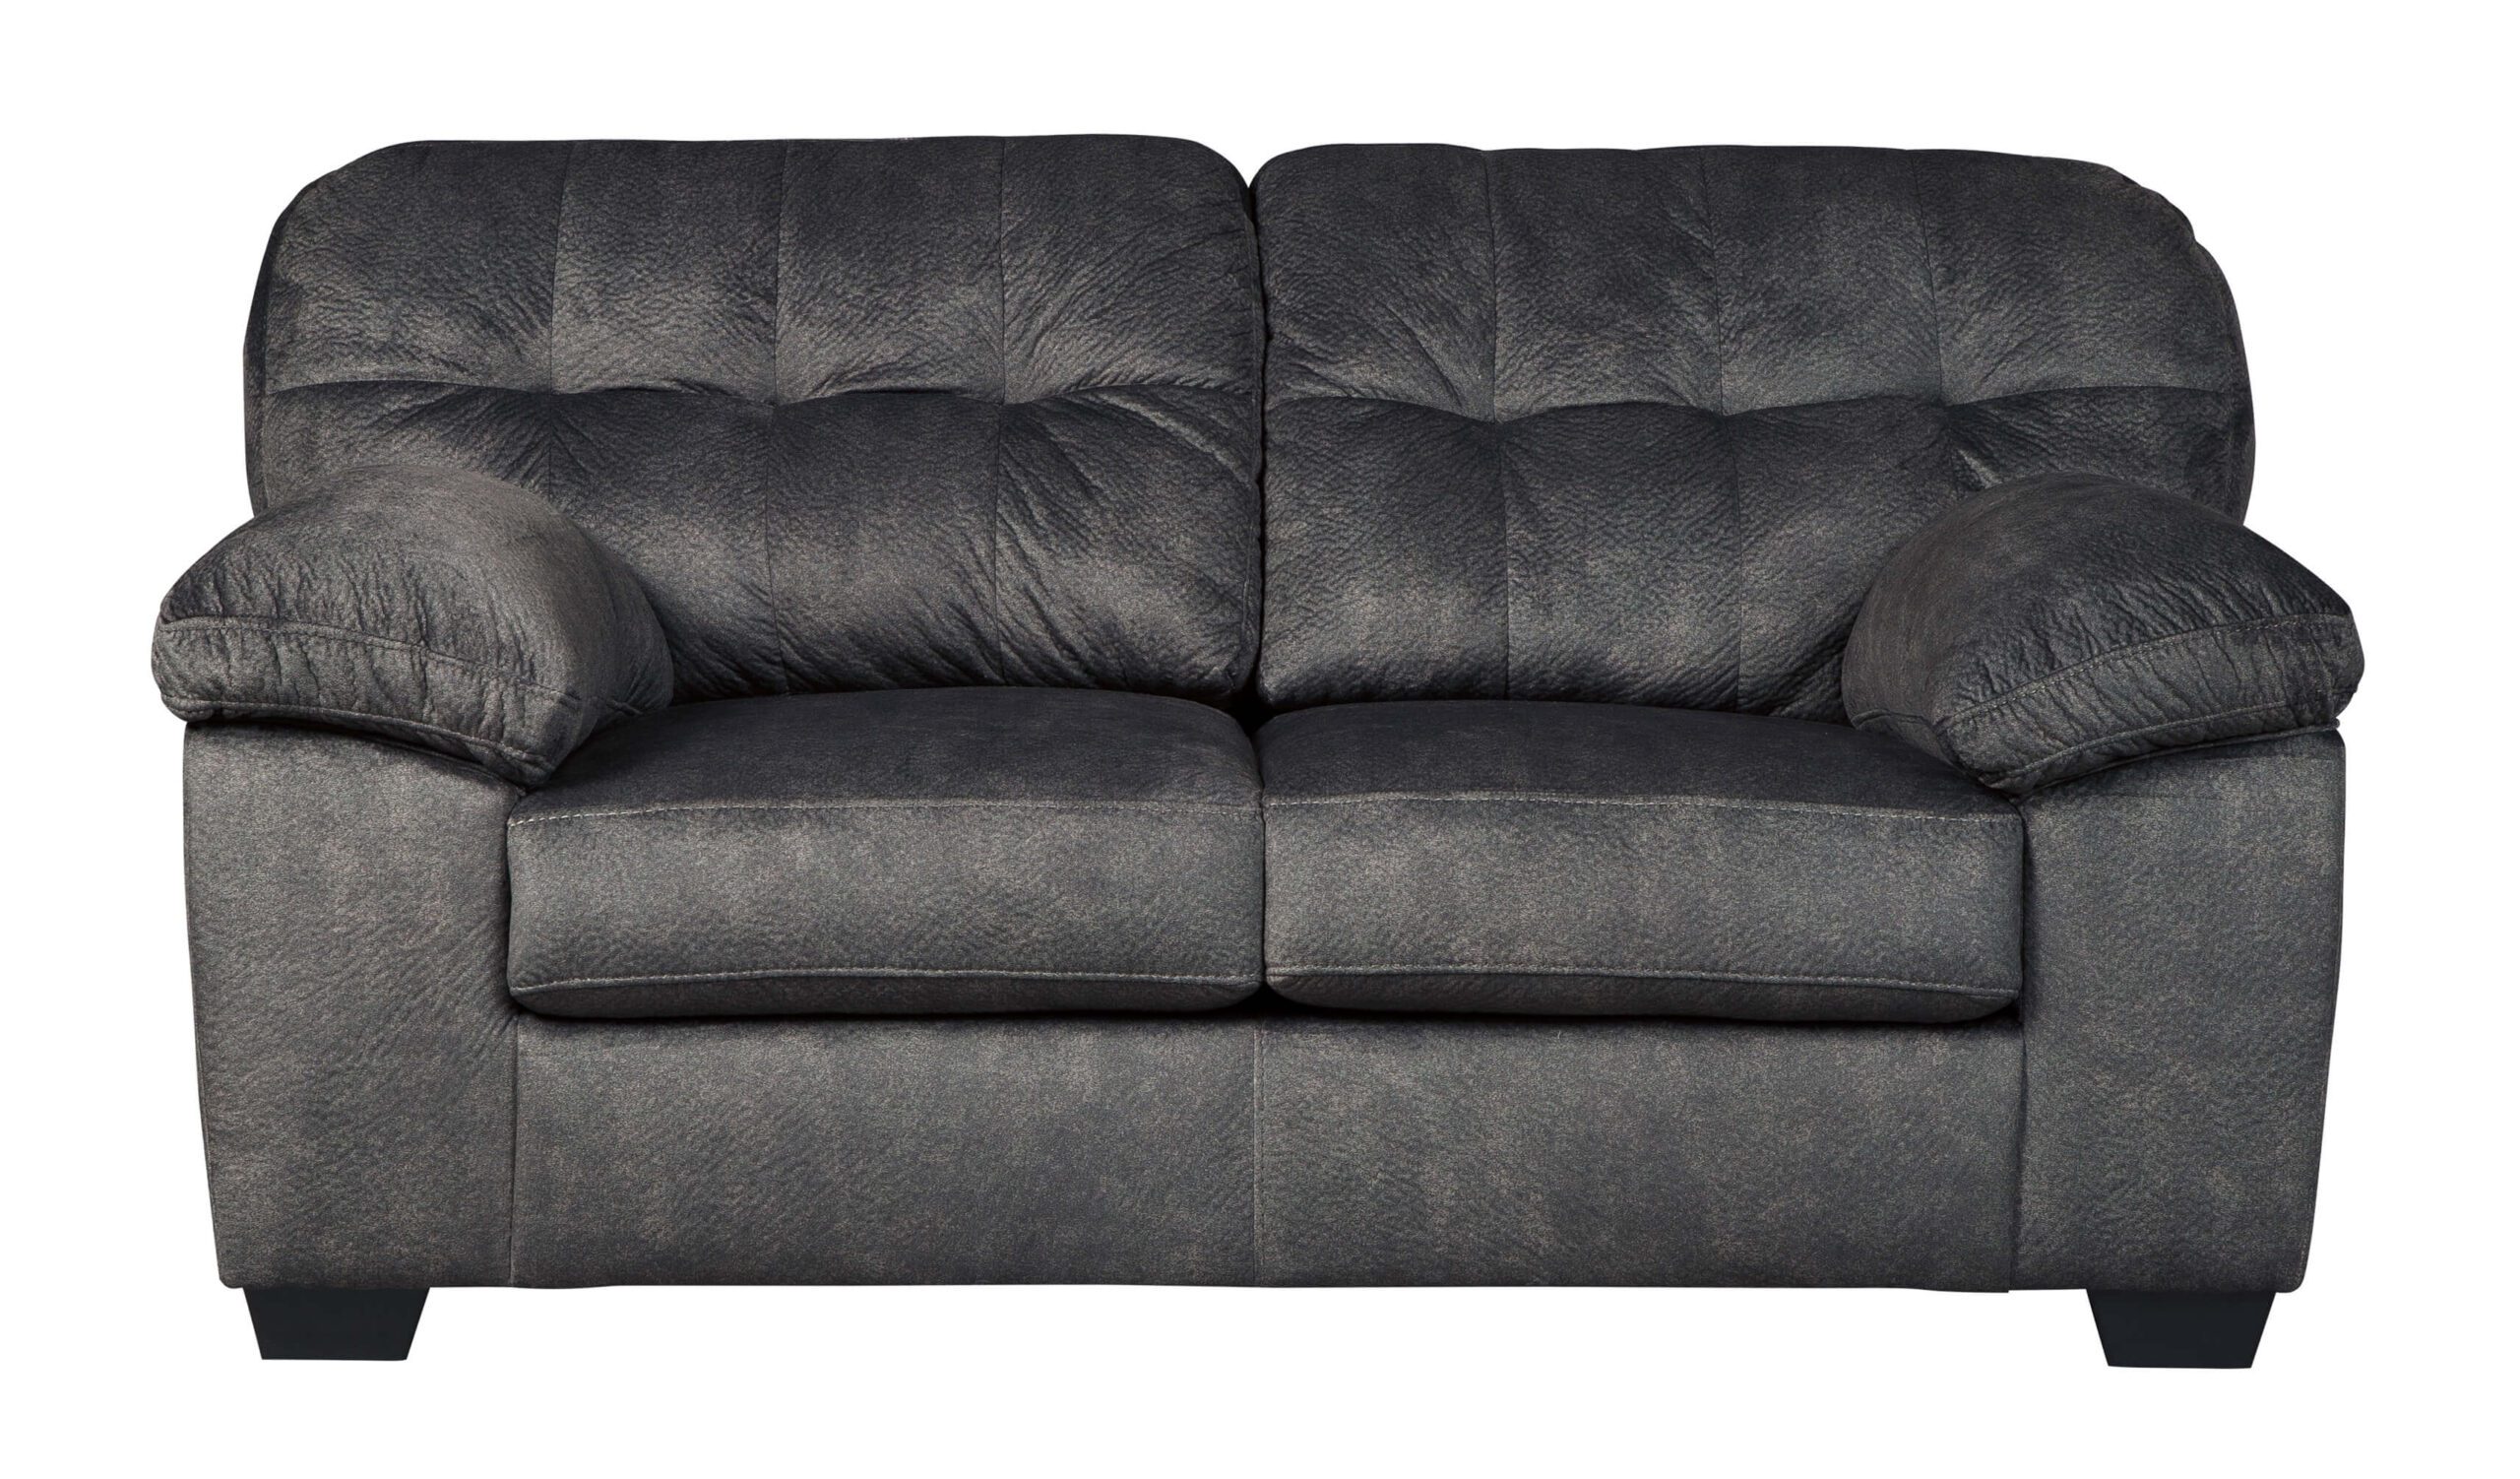 70509-38-35 Accrington Loveseat in Granite by Ashley transparent background product image